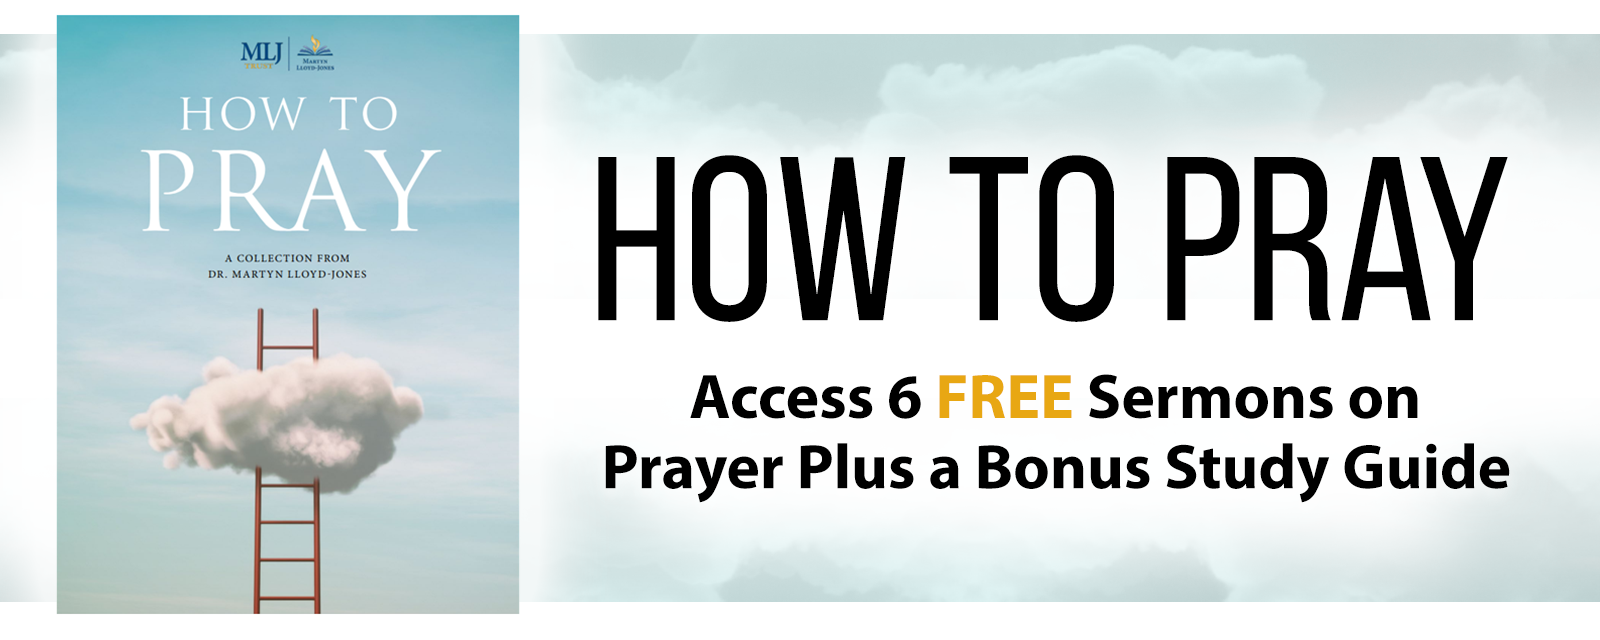 FREE Inspiring Guide Including 6 Free Sermons: How to Find Peace with God